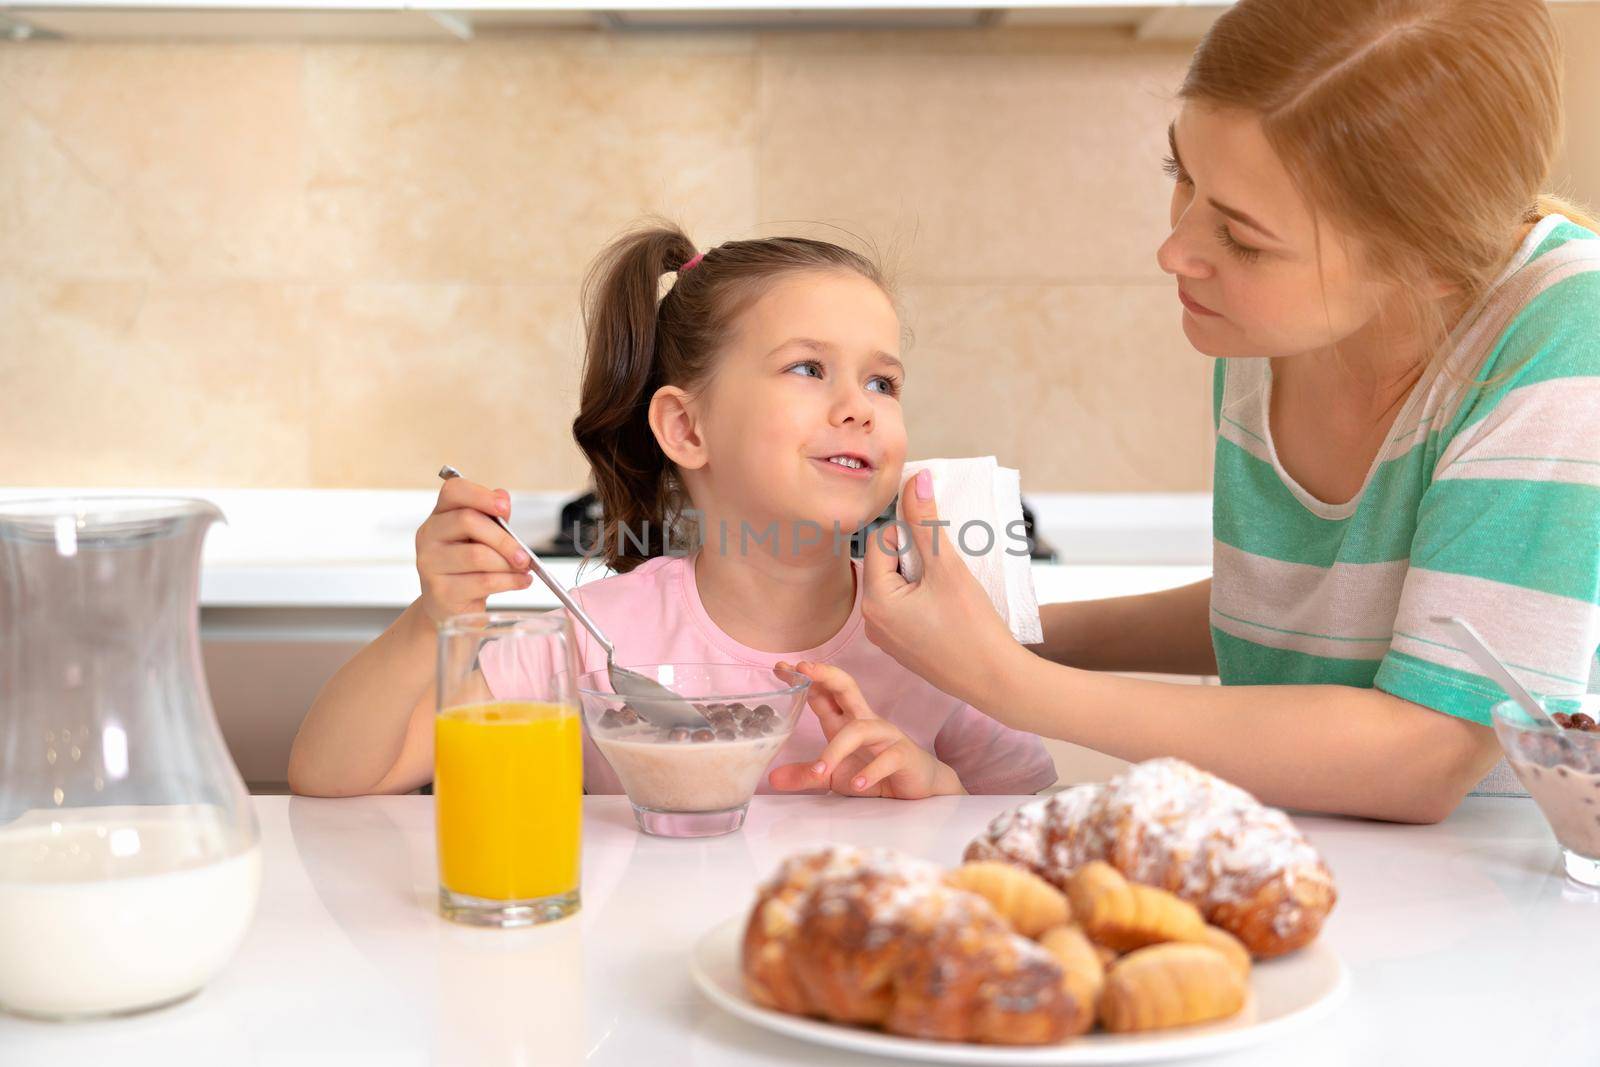 Mother having breakfast with her daughter at a table in kitchen, happy single mother concept by Mariakray